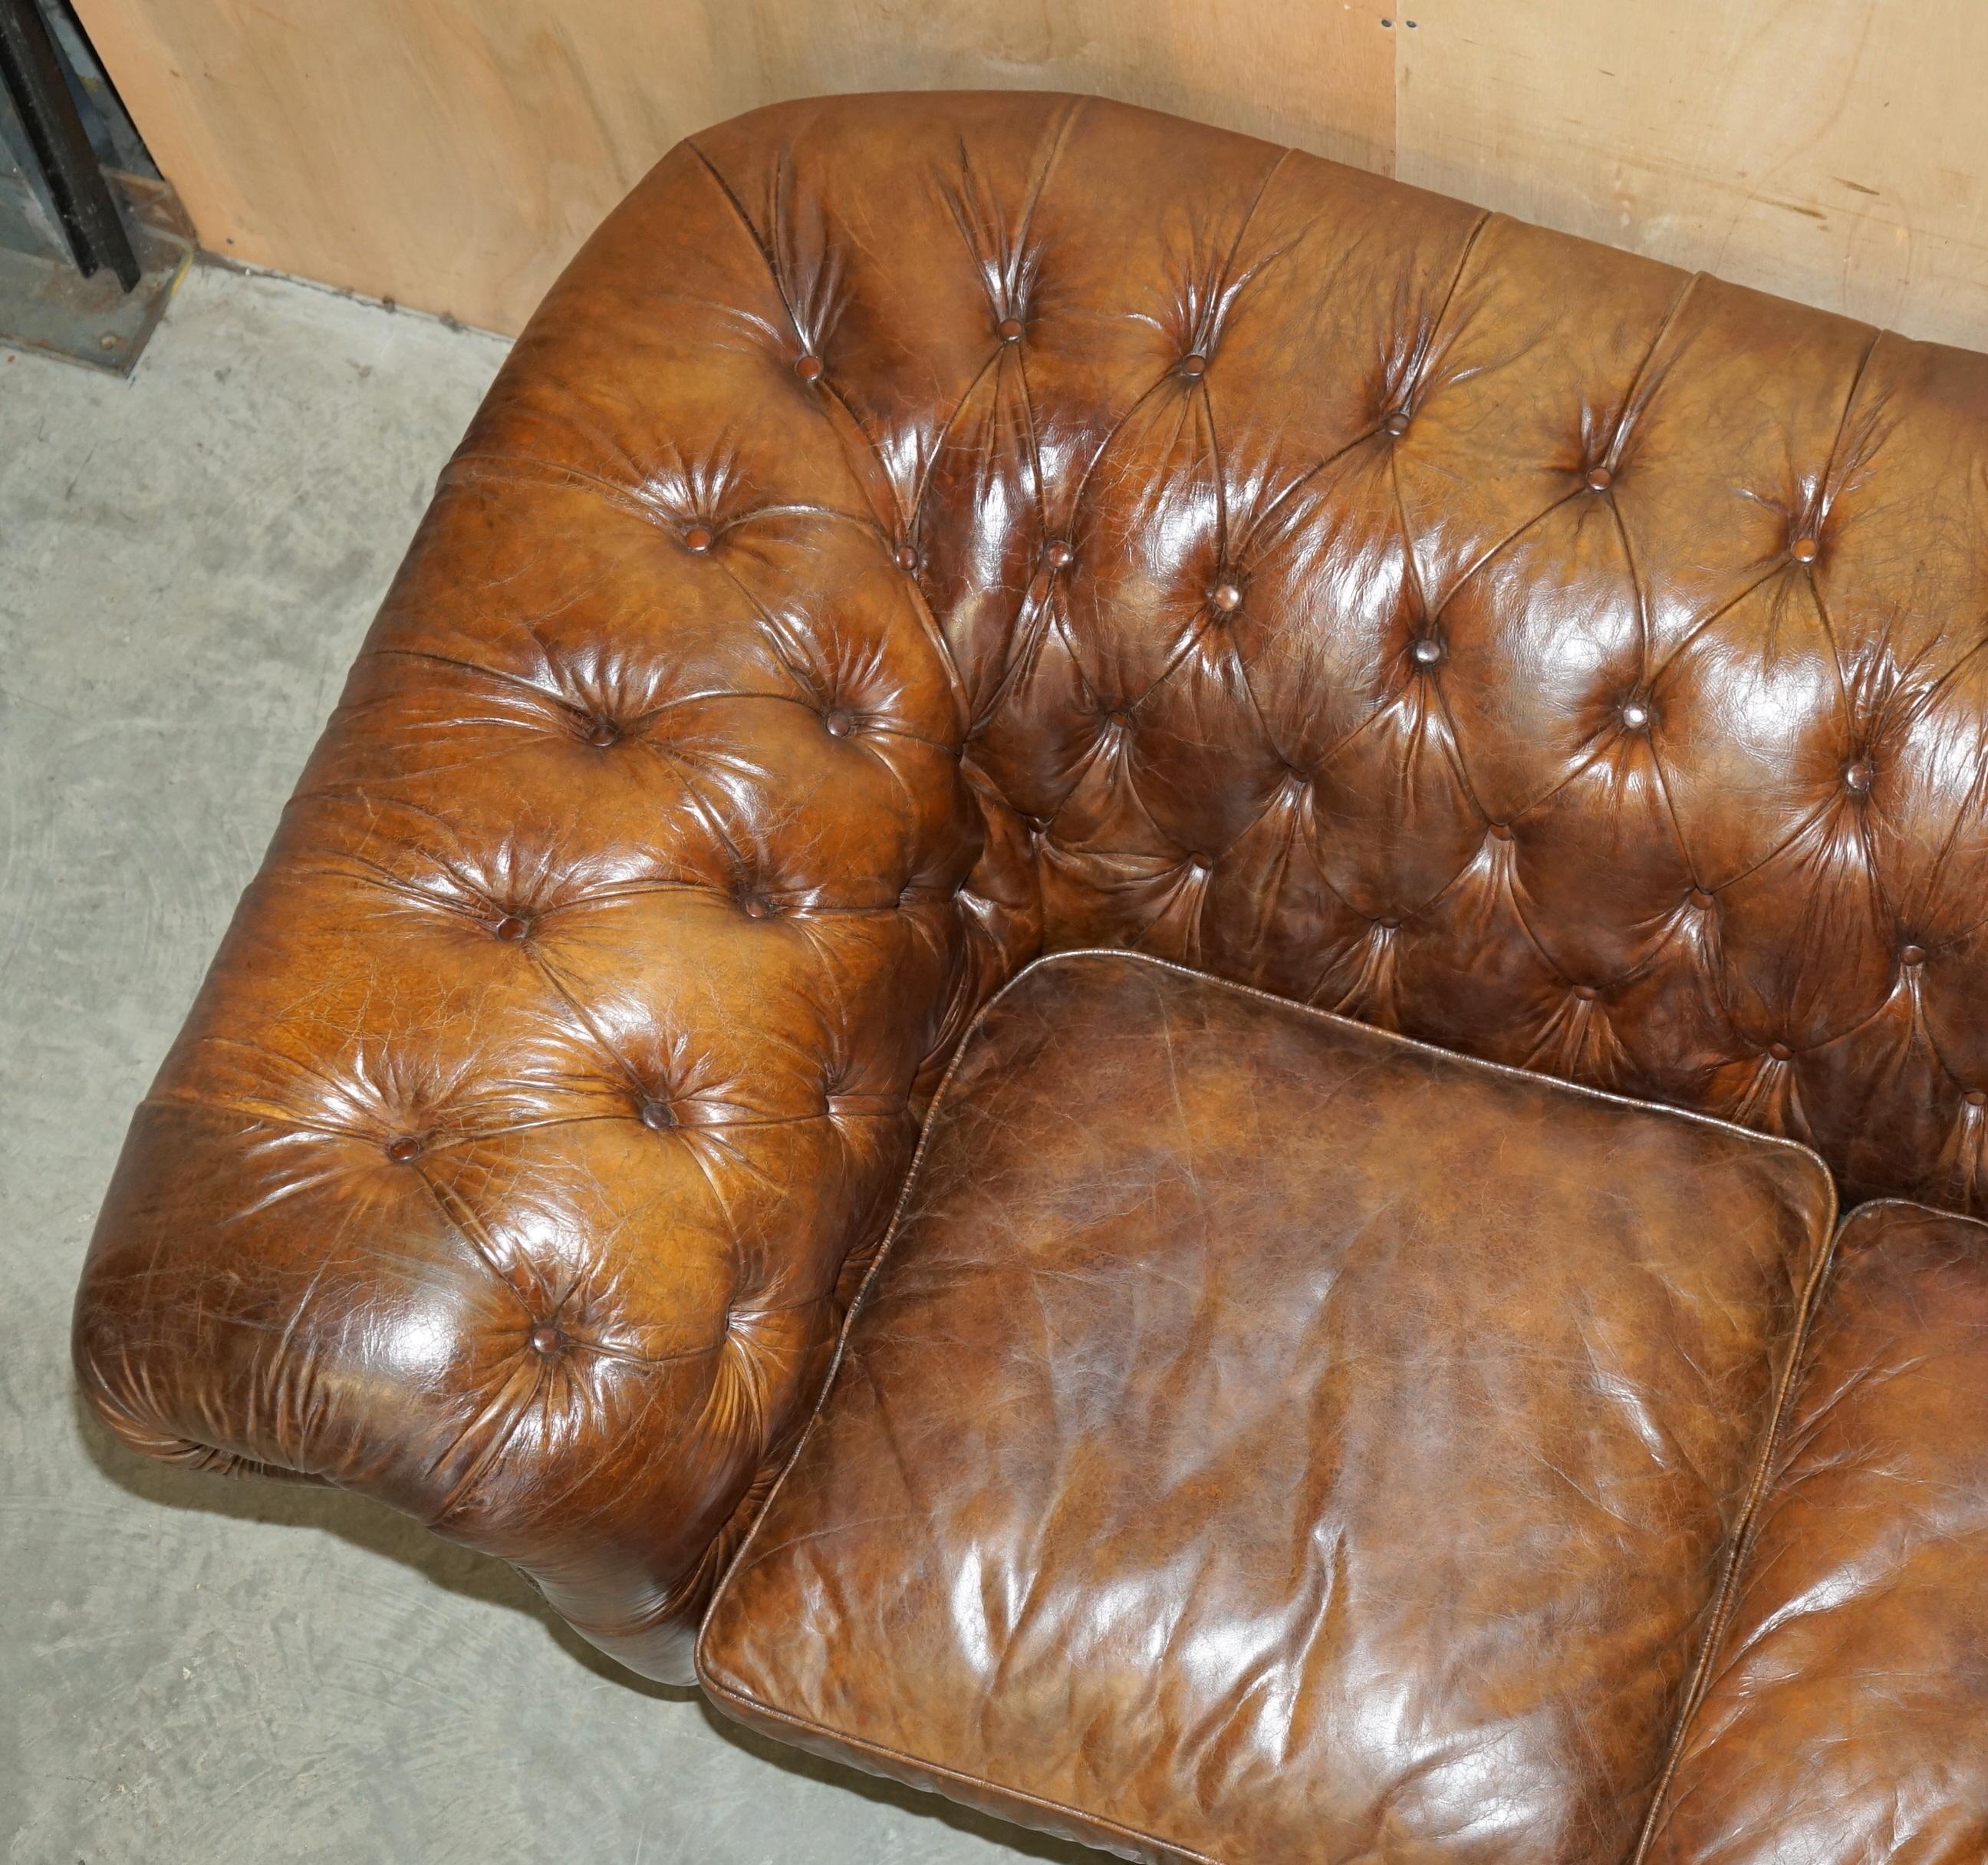 1 von 2 TIMOTHY OULTON HERiTAGE BROWN VINTAGE LEATHER CHESTERFIELD HALO SOFAS im Angebot 4